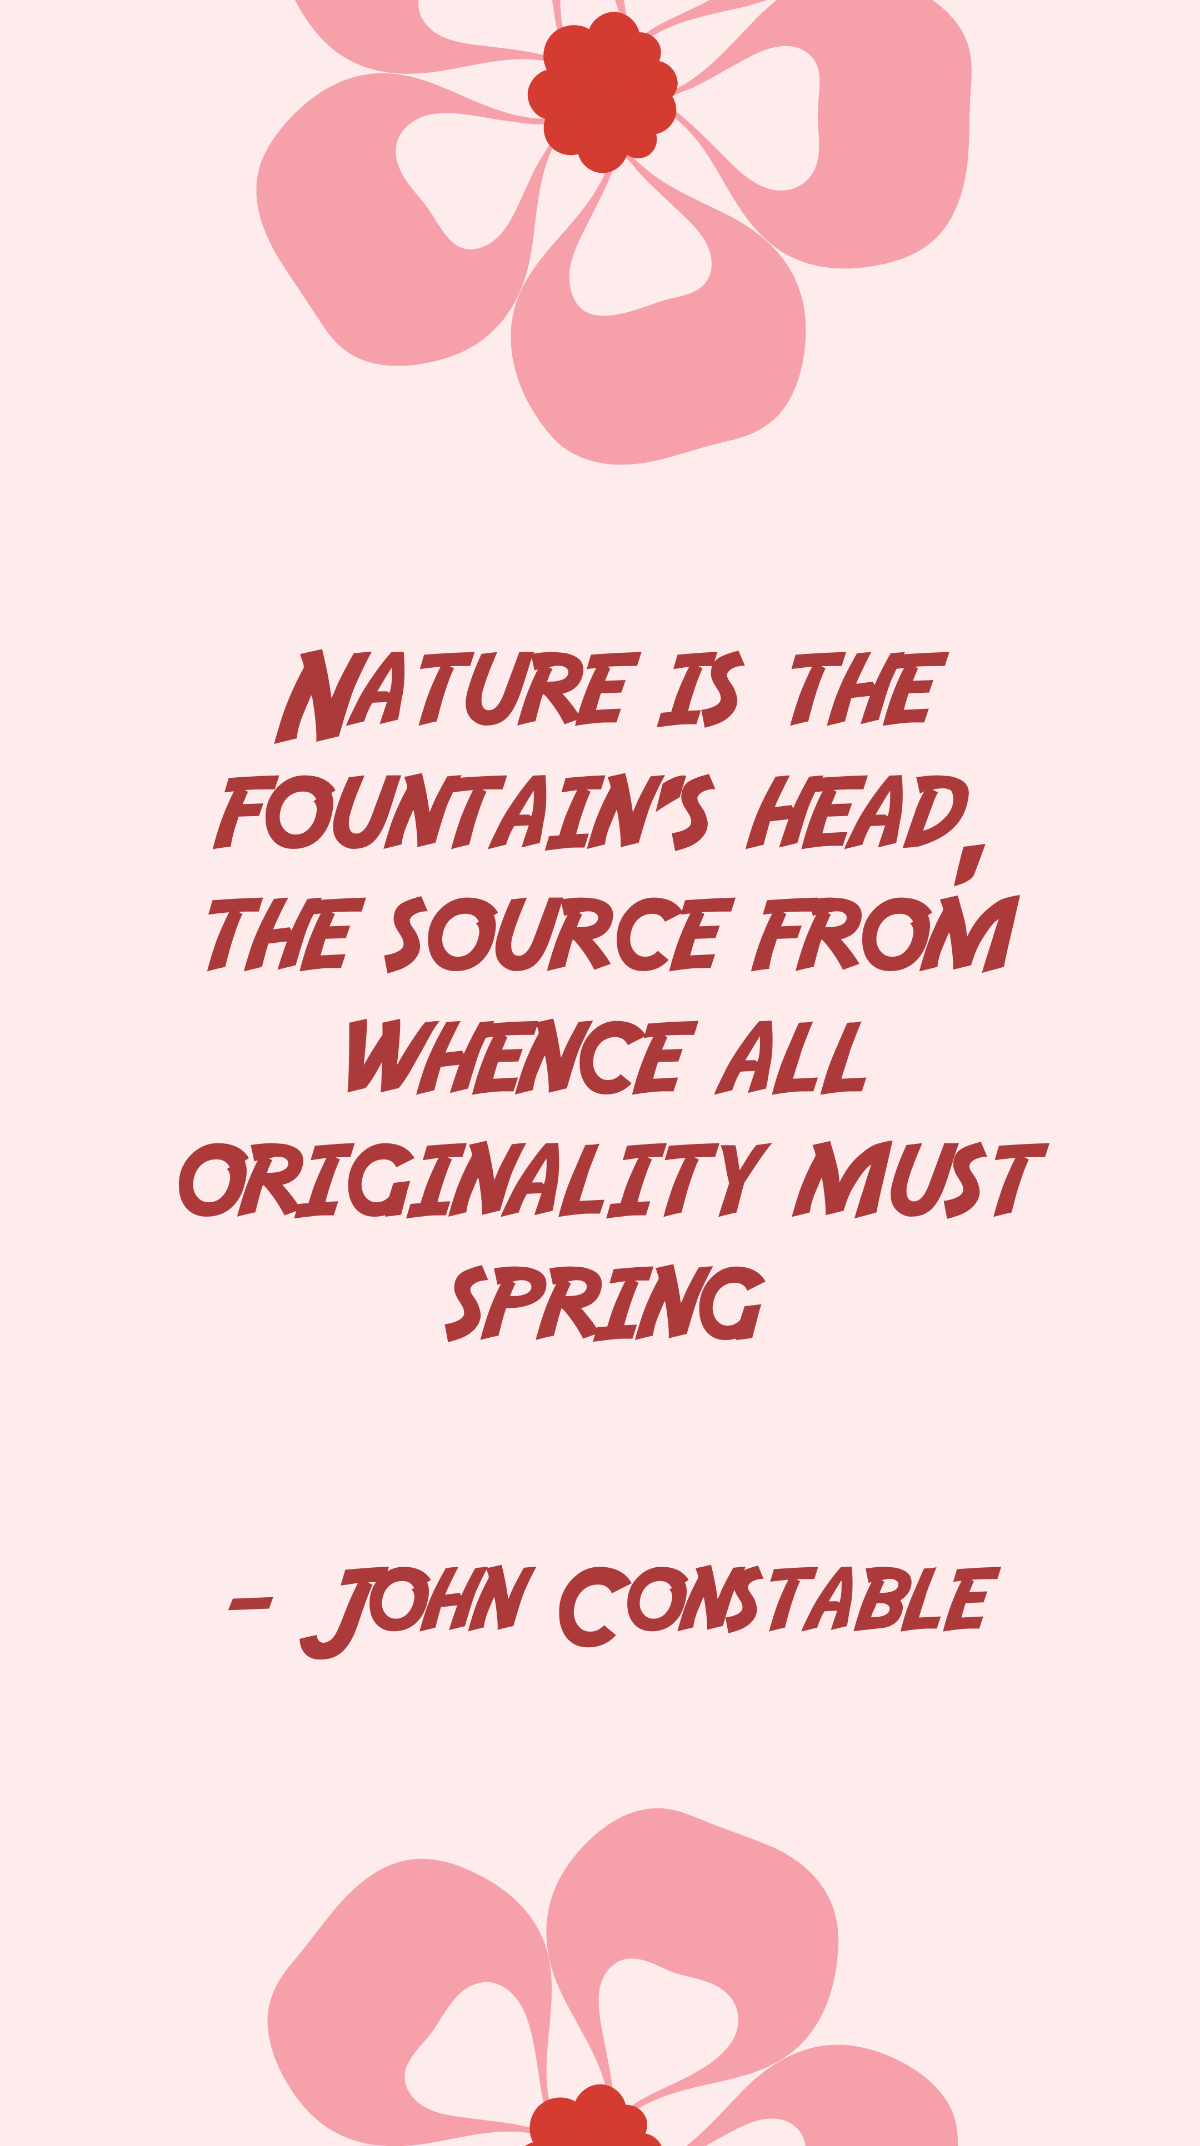 John Constable - Nature is the fountain's head, the source from whence all originality must spring Template